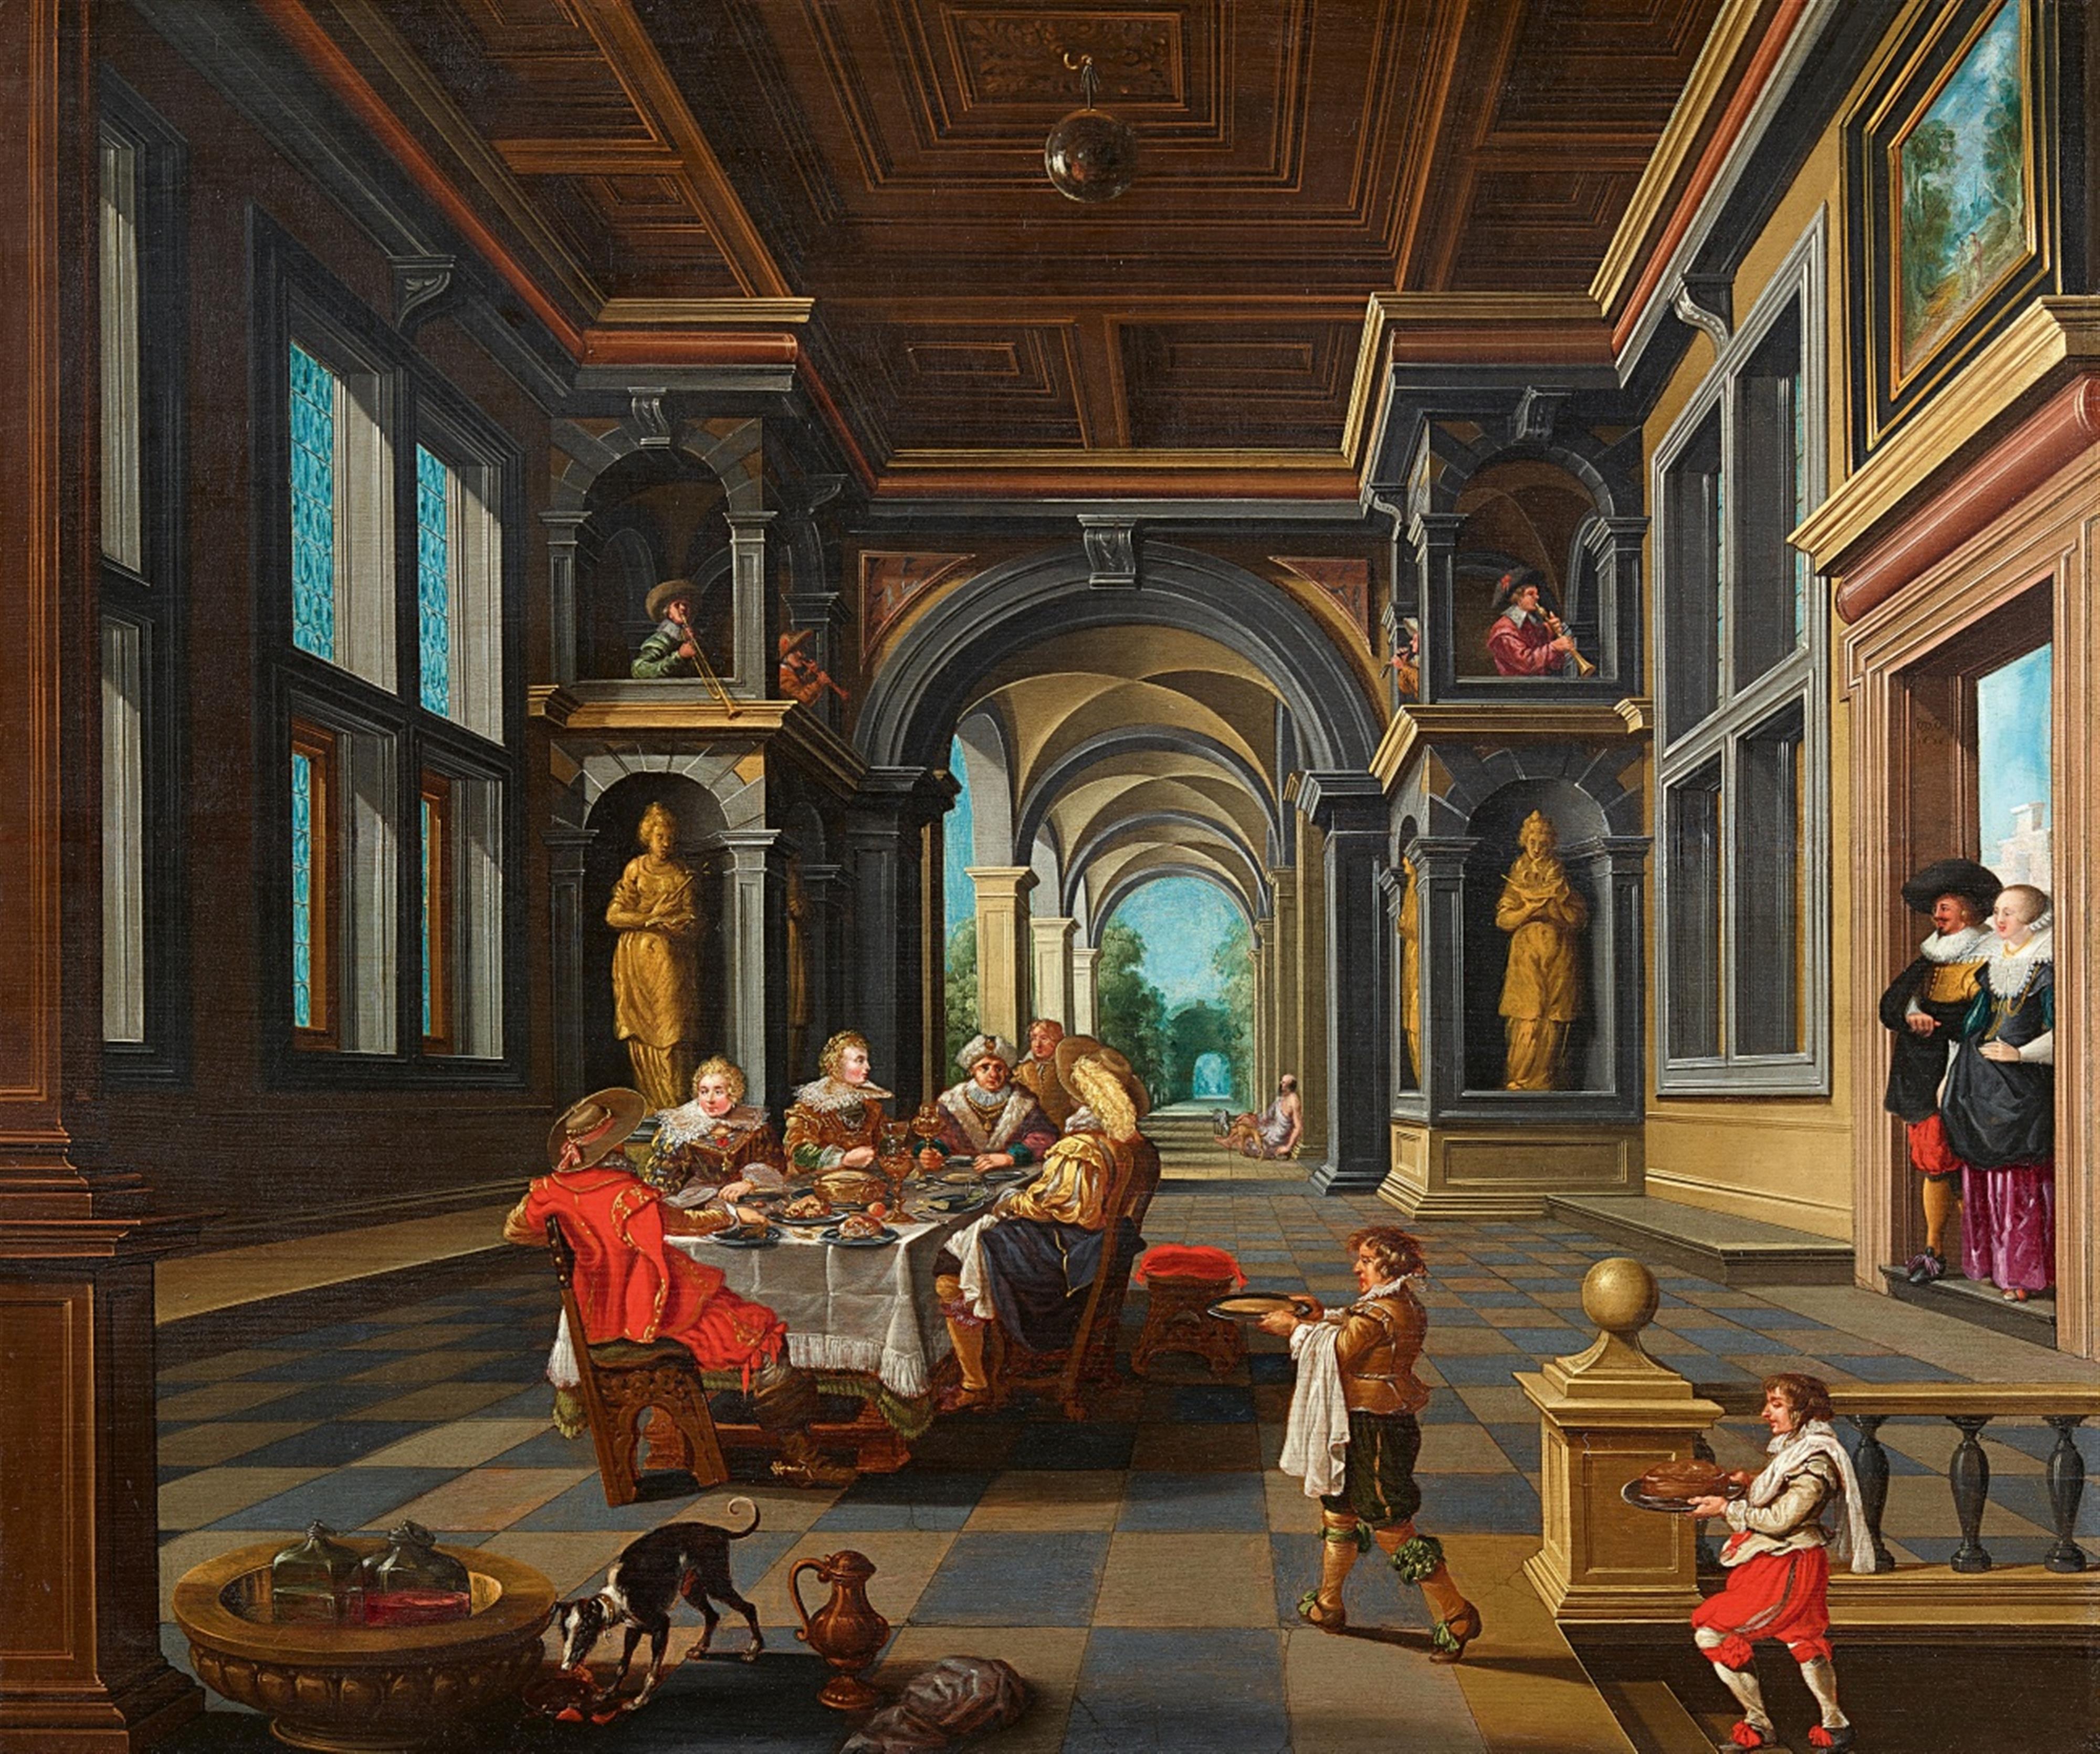 Dirck van Delen - Palace Interior with the Parable of the Rich Man and Poor Lazarus - image-1